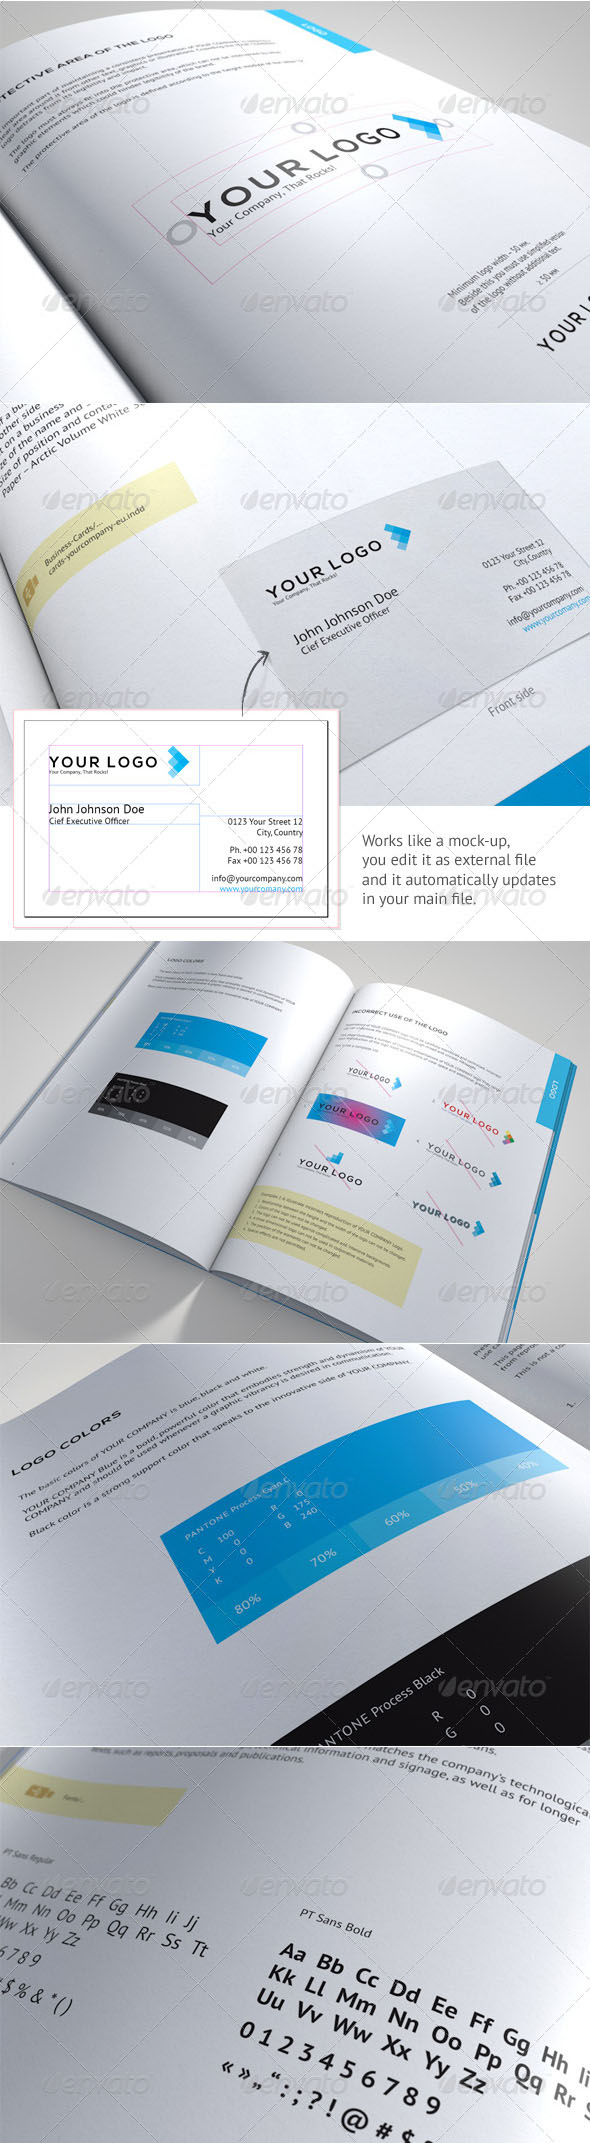 Corporate Identity Guidelines